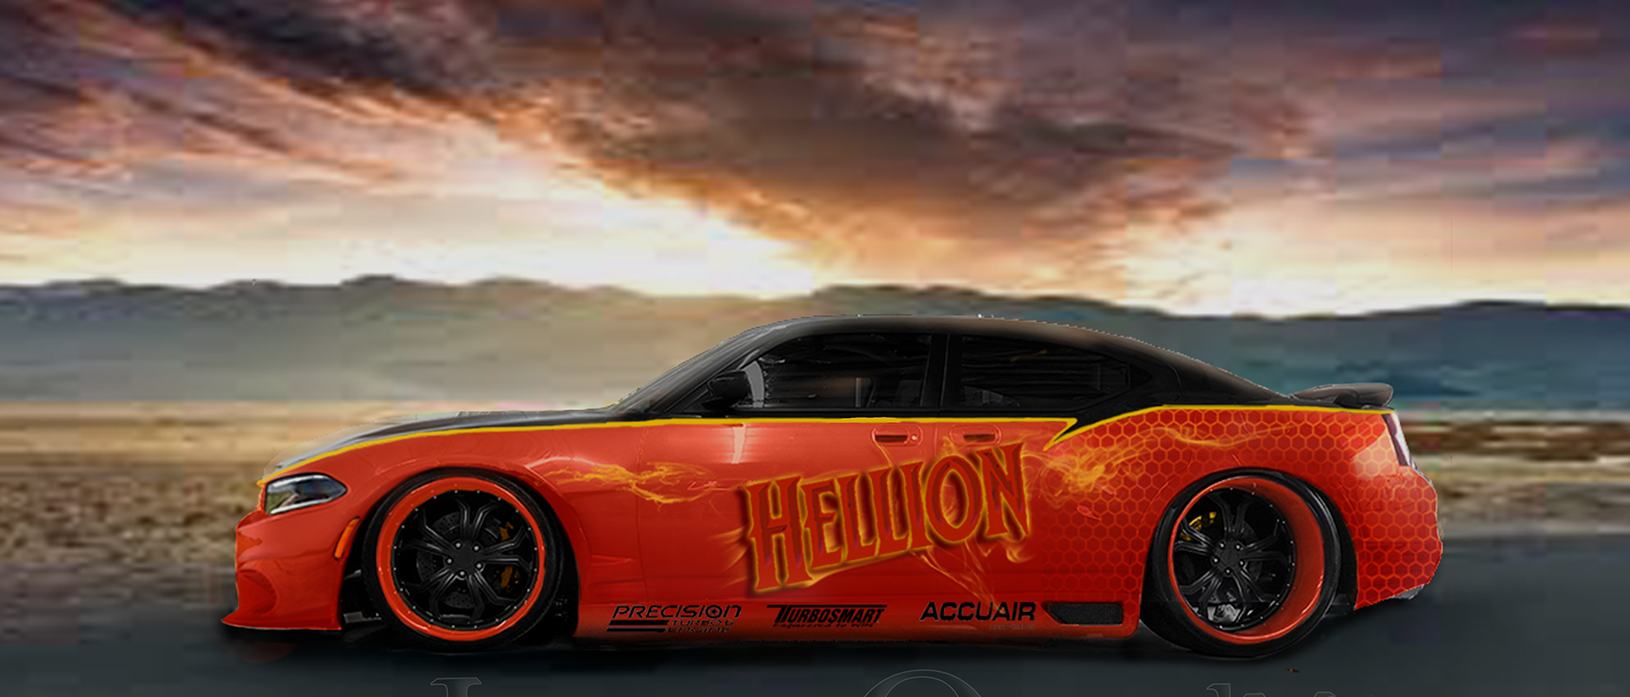 Hellion Dodge Charger